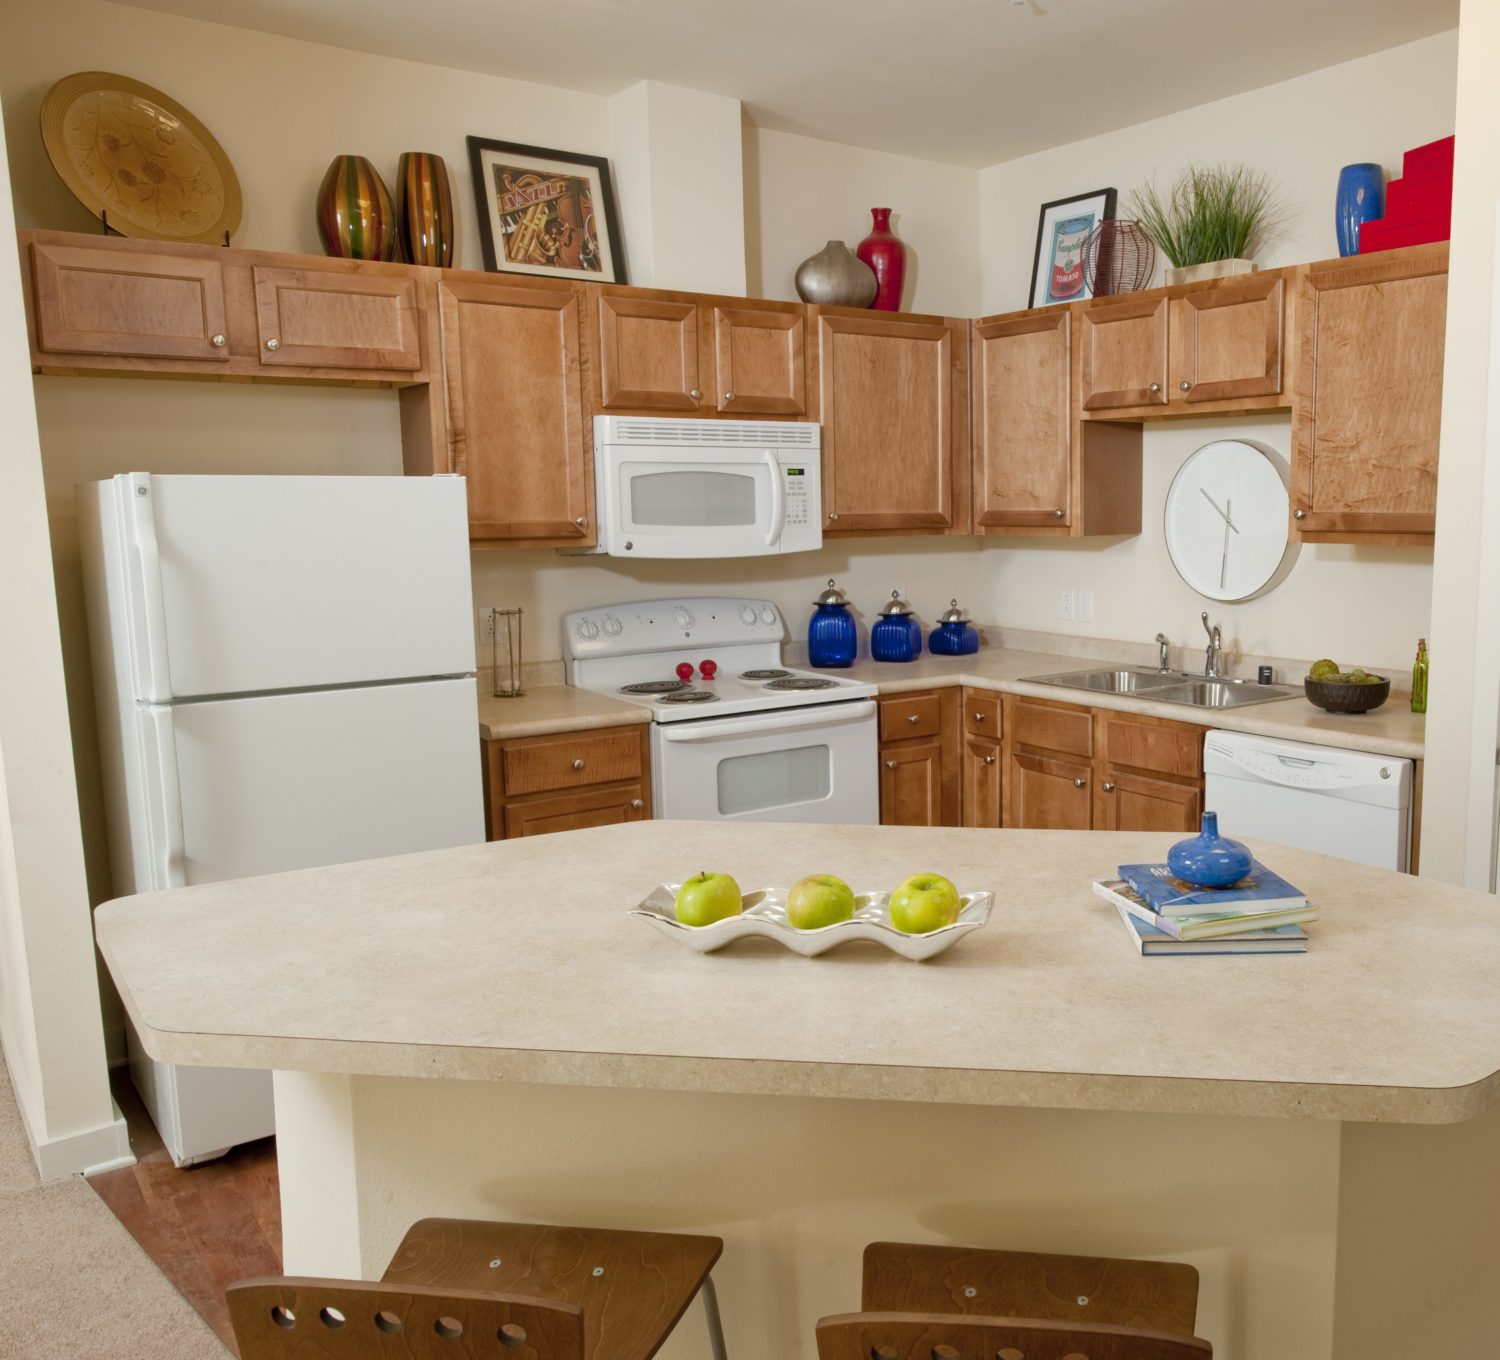 Large kitchen with an island and plenty of cabinet storage